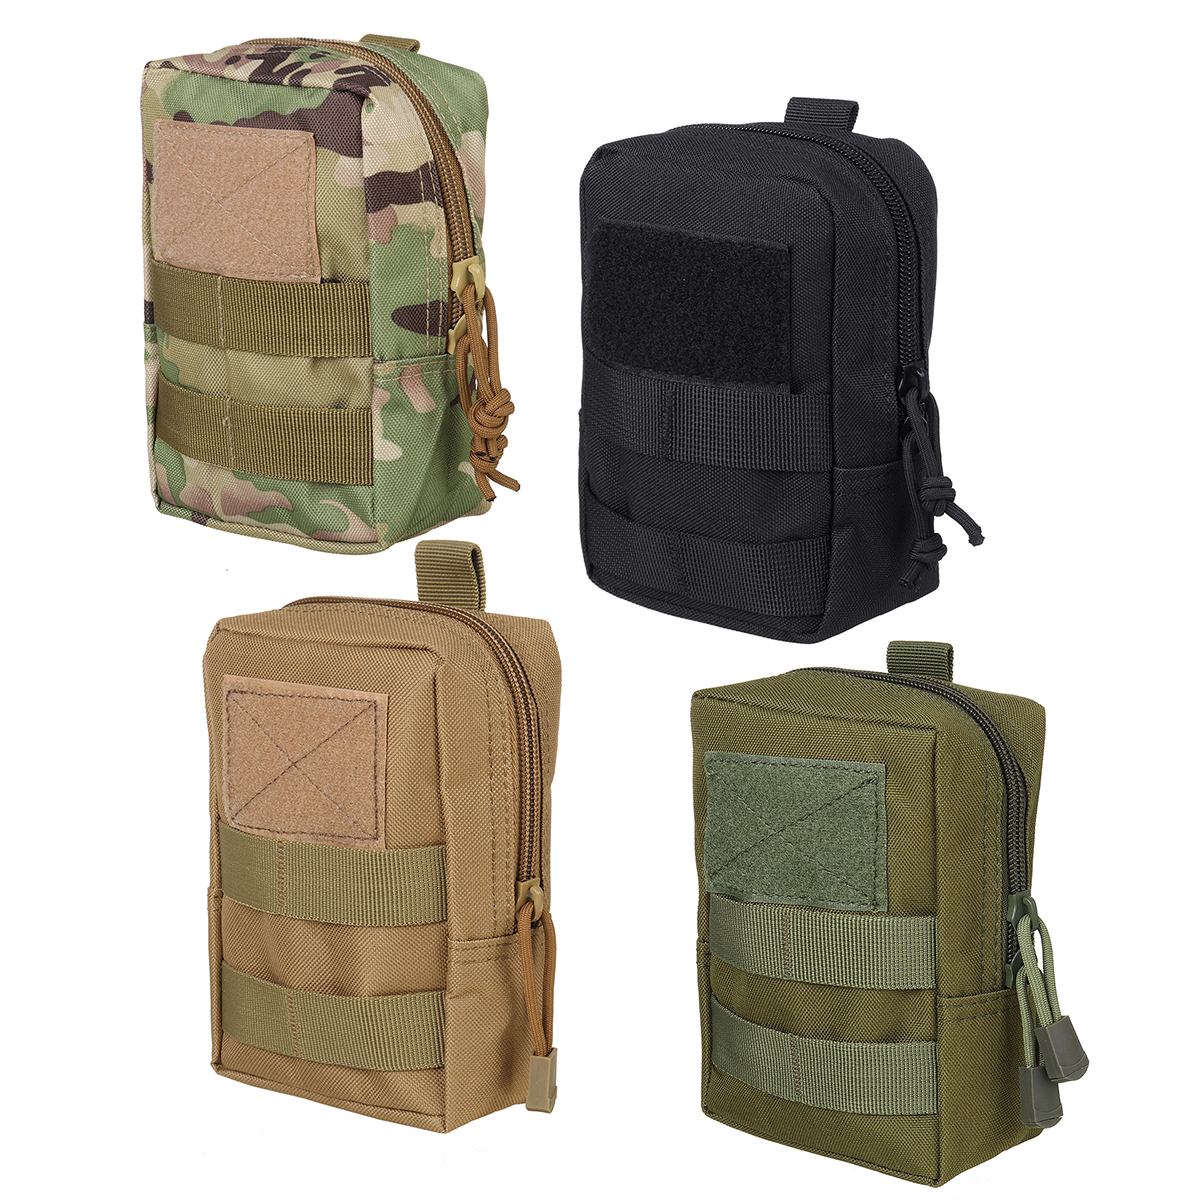 Military-Tactical-Camo-Belt-Pouch-Bag-Pack-Phone-Bags-Molle-Pouch-Camping-Waist-Pocket-Bag-Phone-Cas-1777605-2